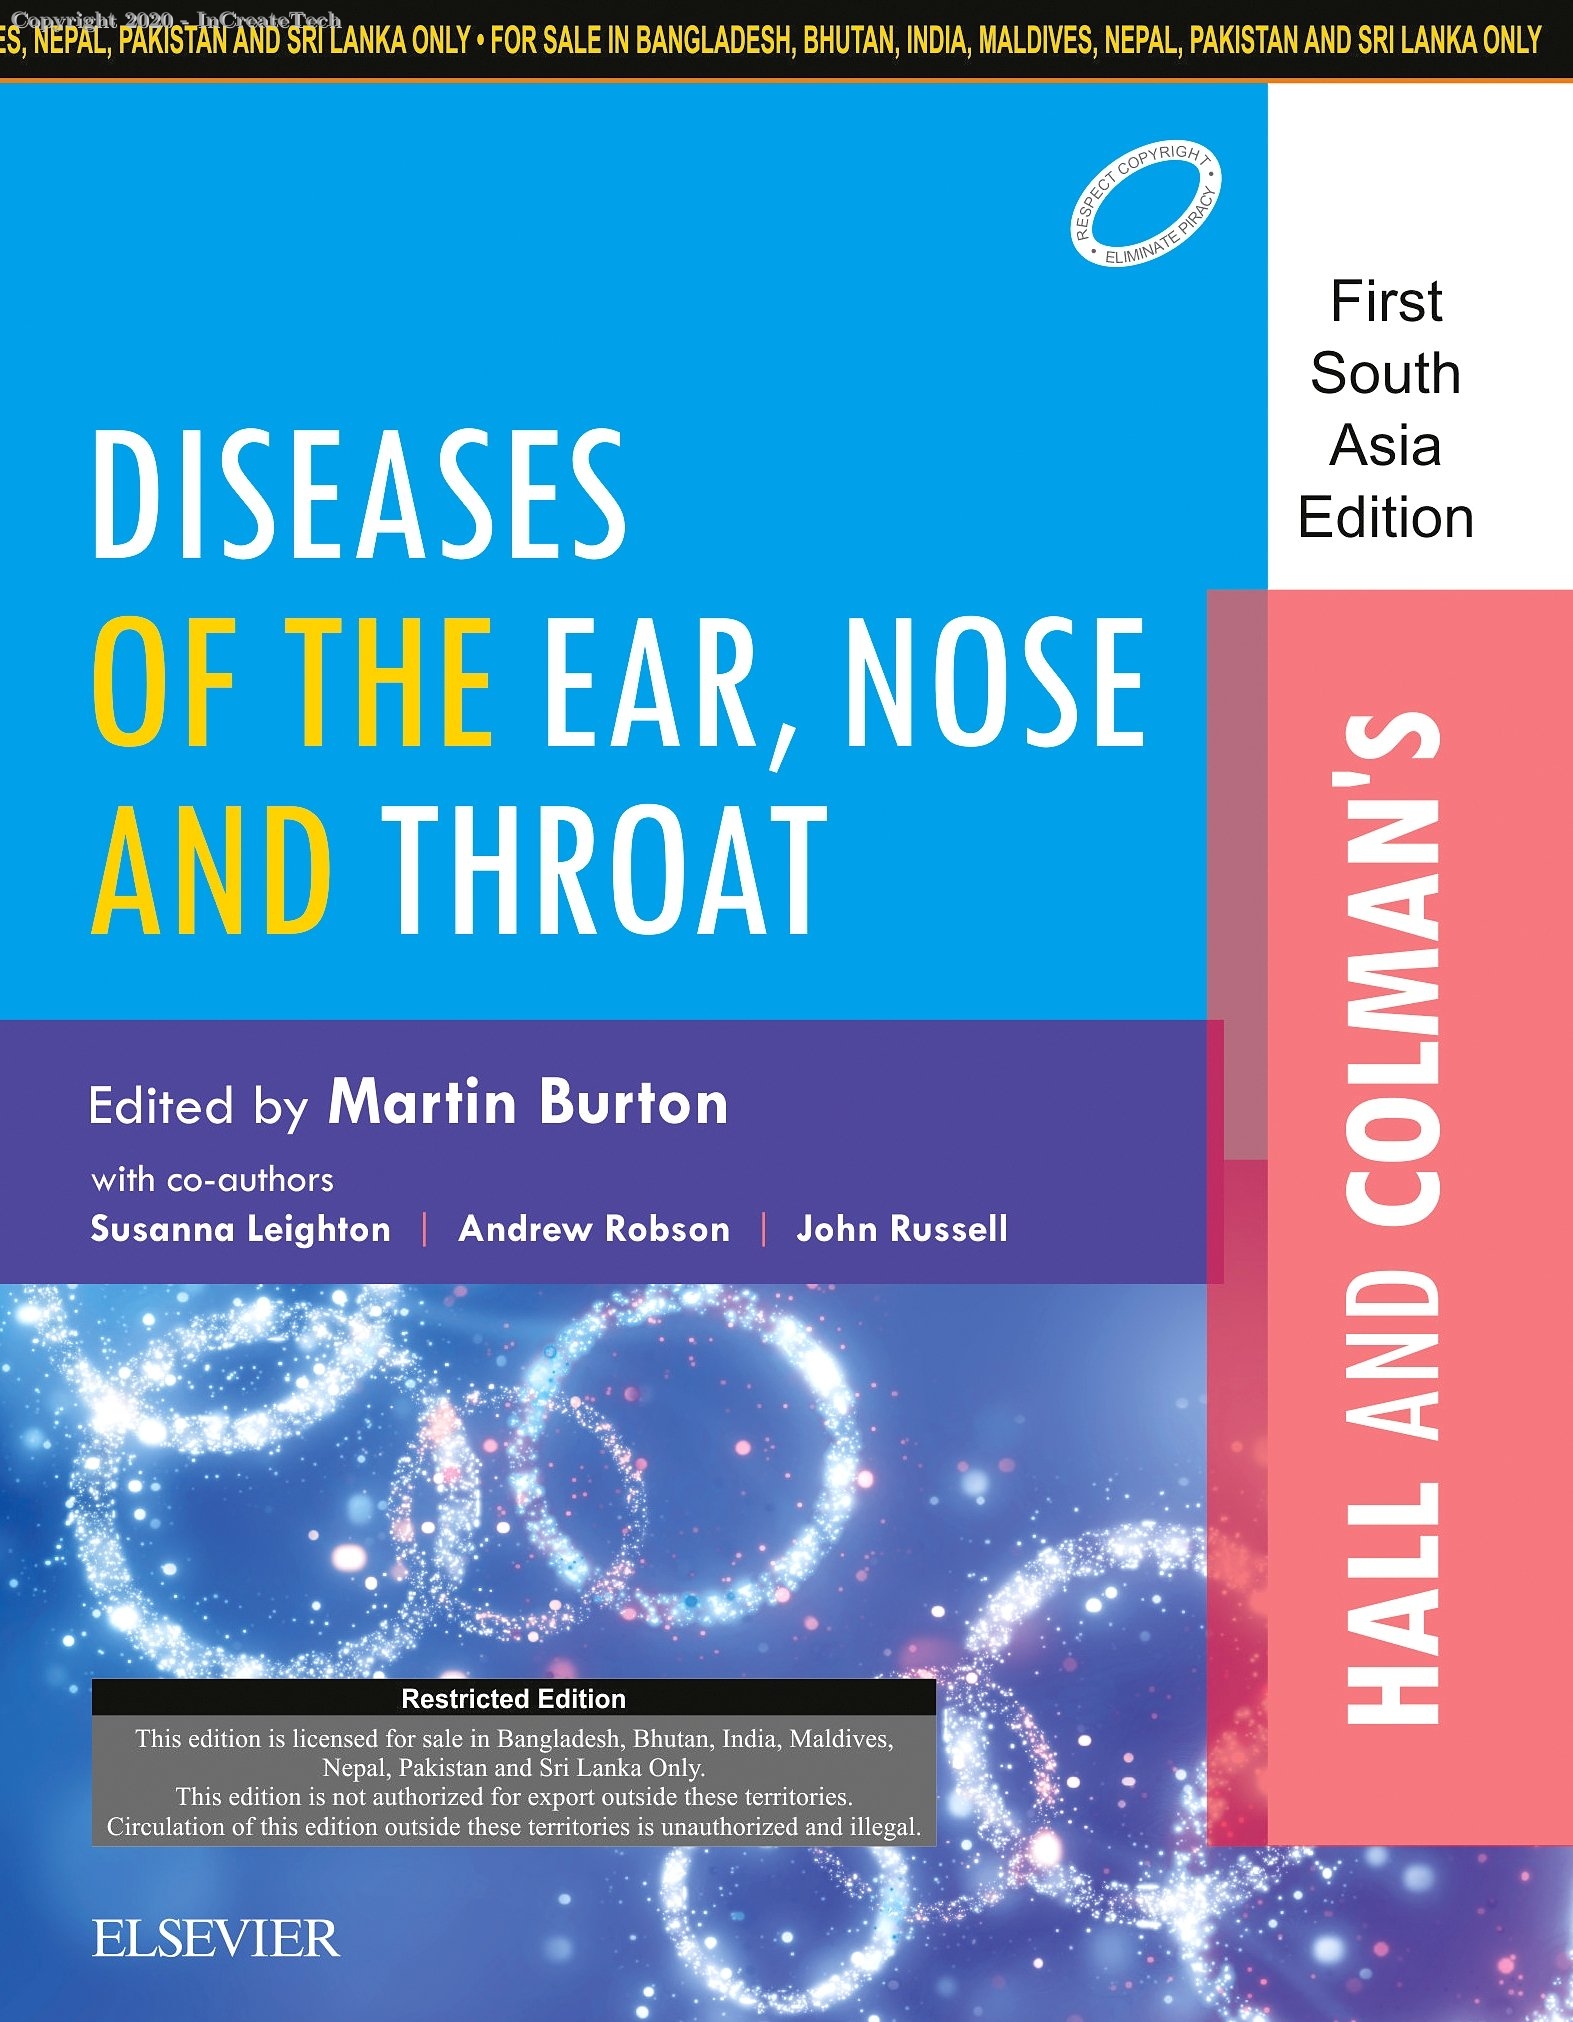 Hall and Colman's Diseases of the Ear, Nose and Throat